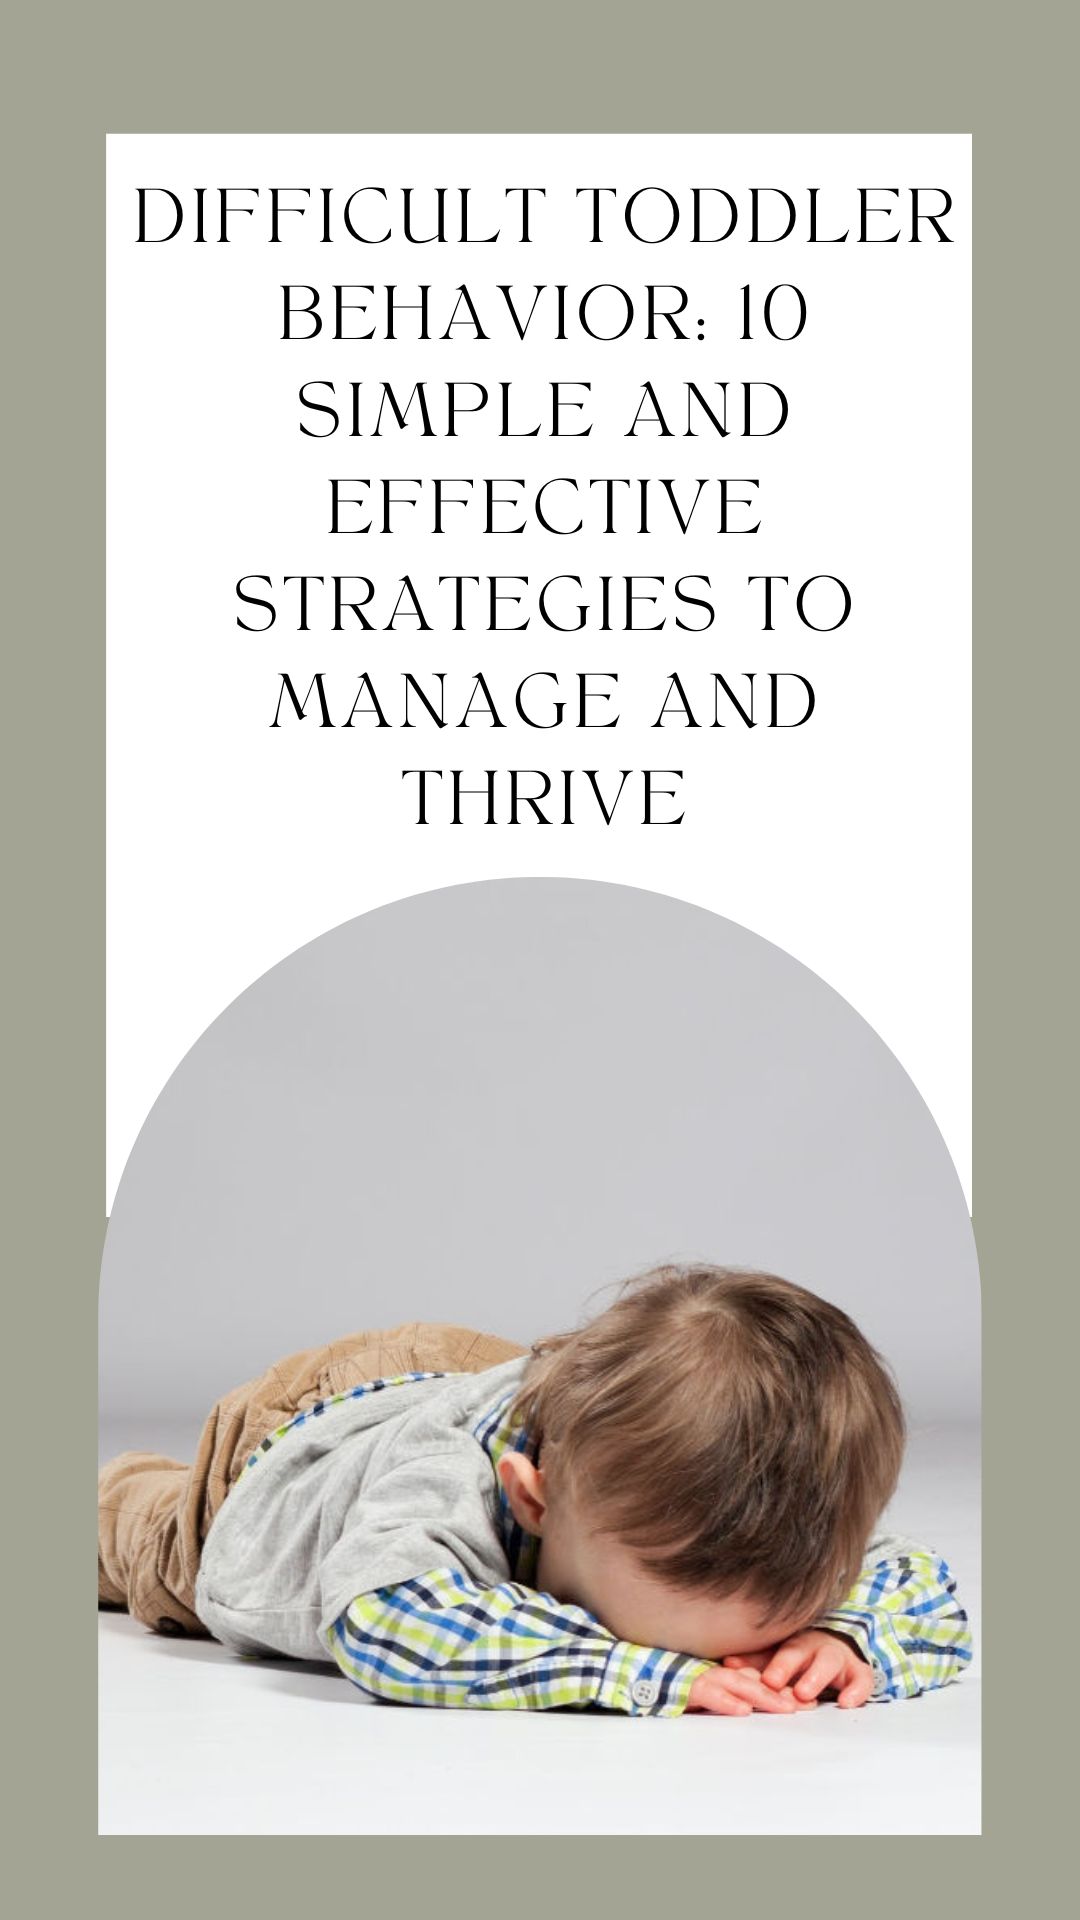 Difficult Toddler Behavior: 10 Simple and Effective Strategies to Manage and Thrive